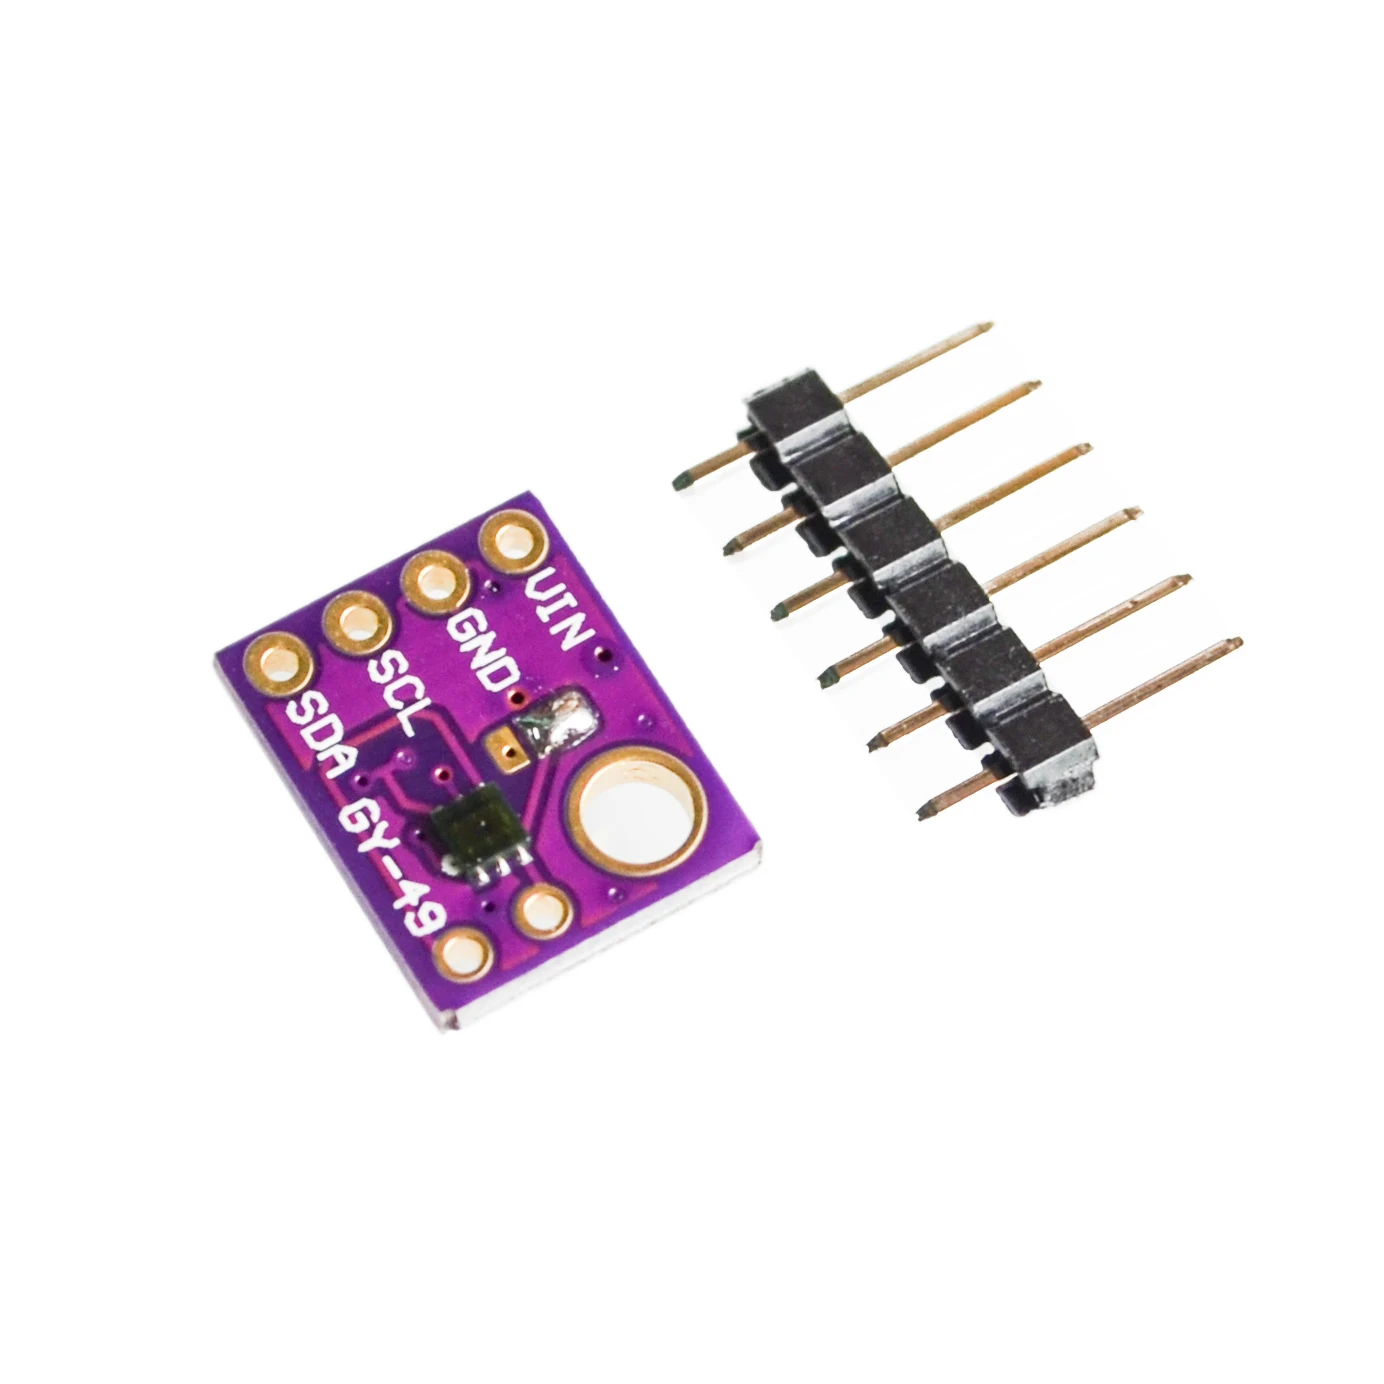 2pcs MAX44009 Ambient Light Sensor Module for Arduino with 4P Pin Header 